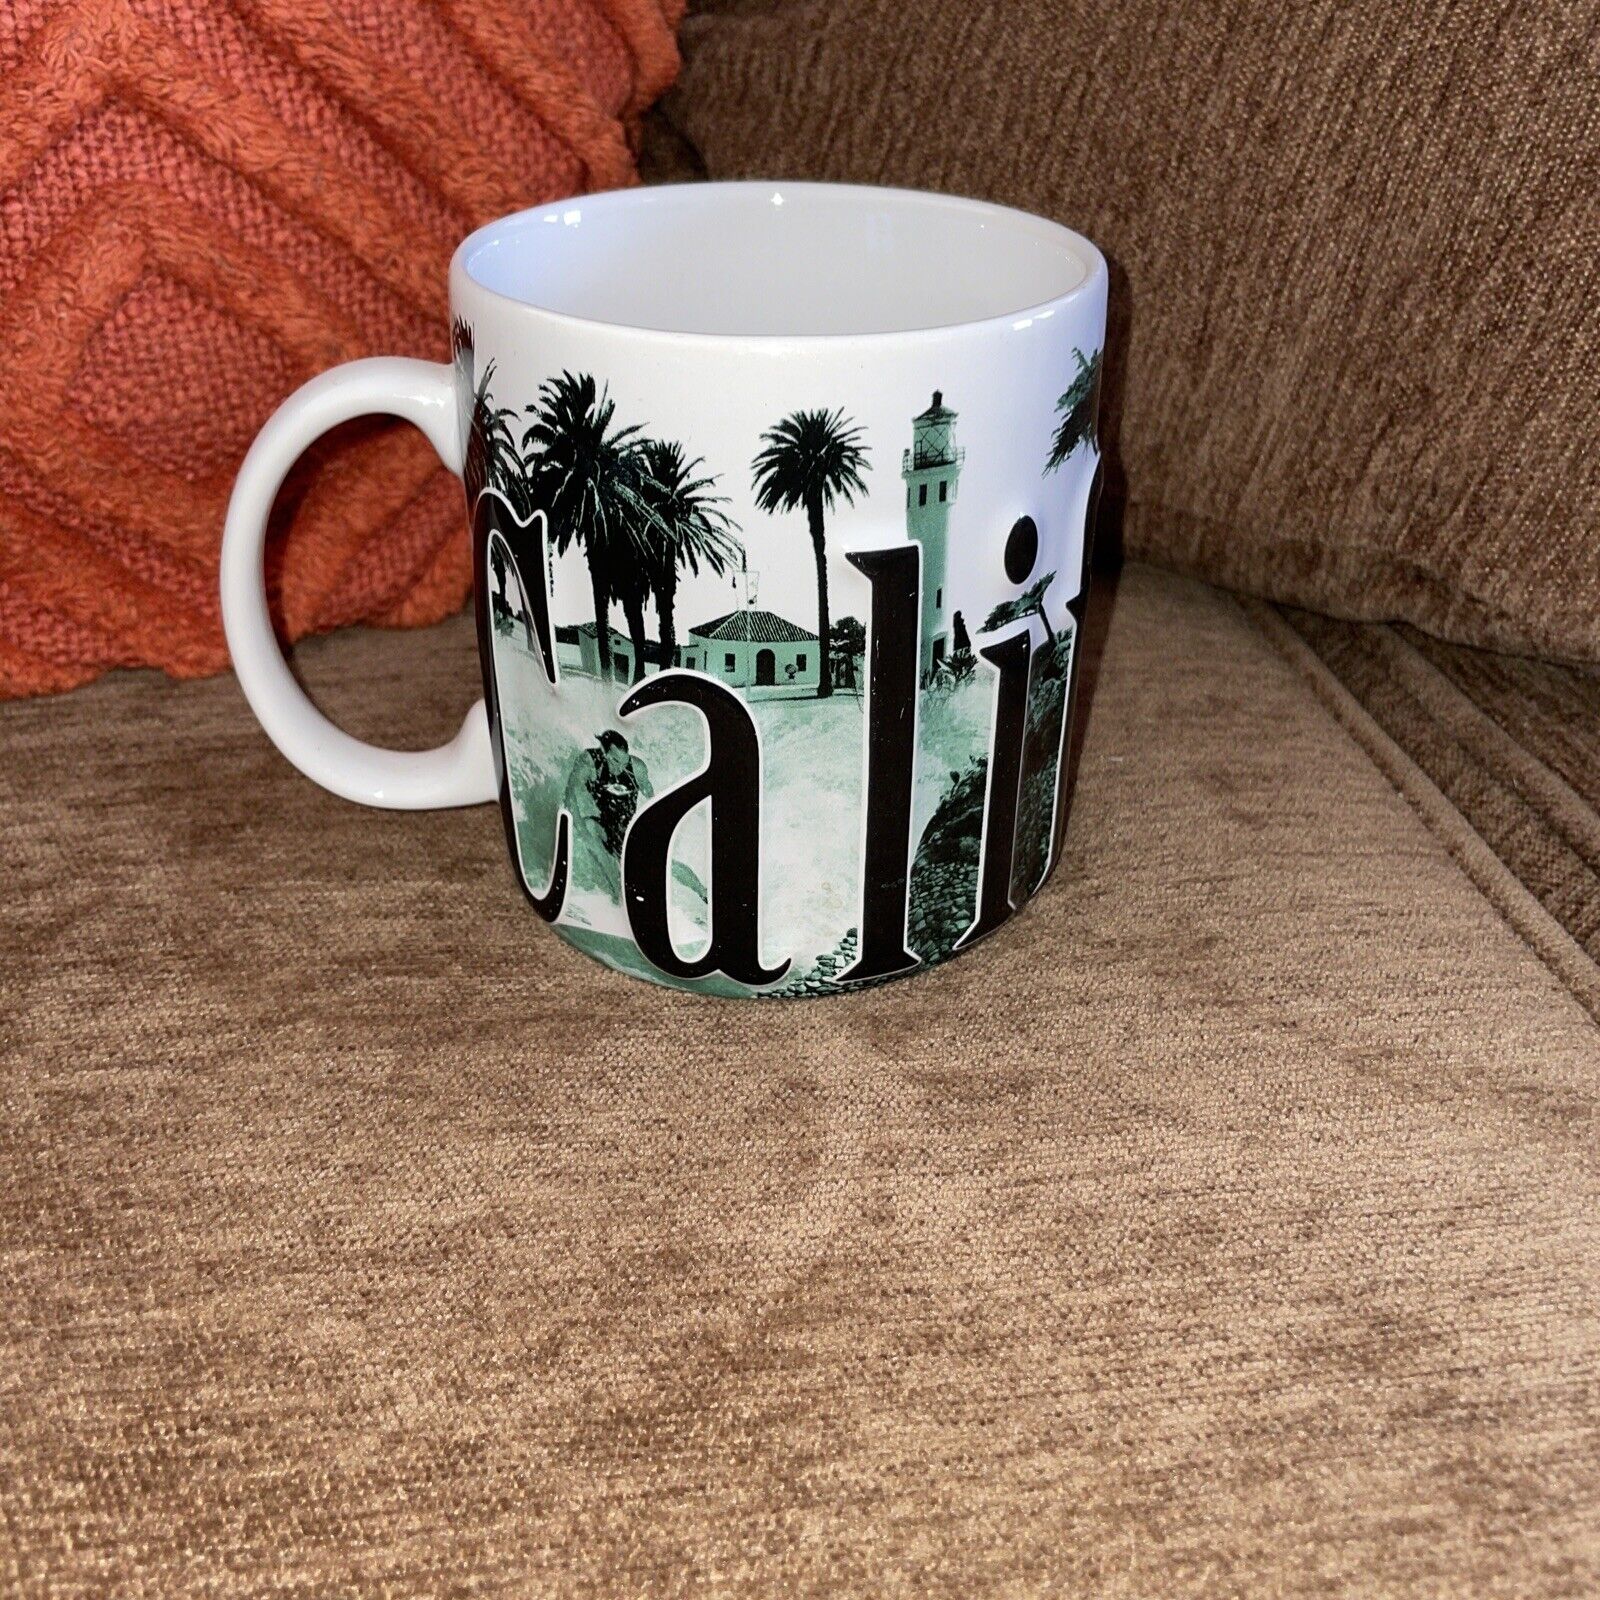 California XL (18 oz.)Coffee Mug By Americaware 2007. Embossed 3D Relief Contour